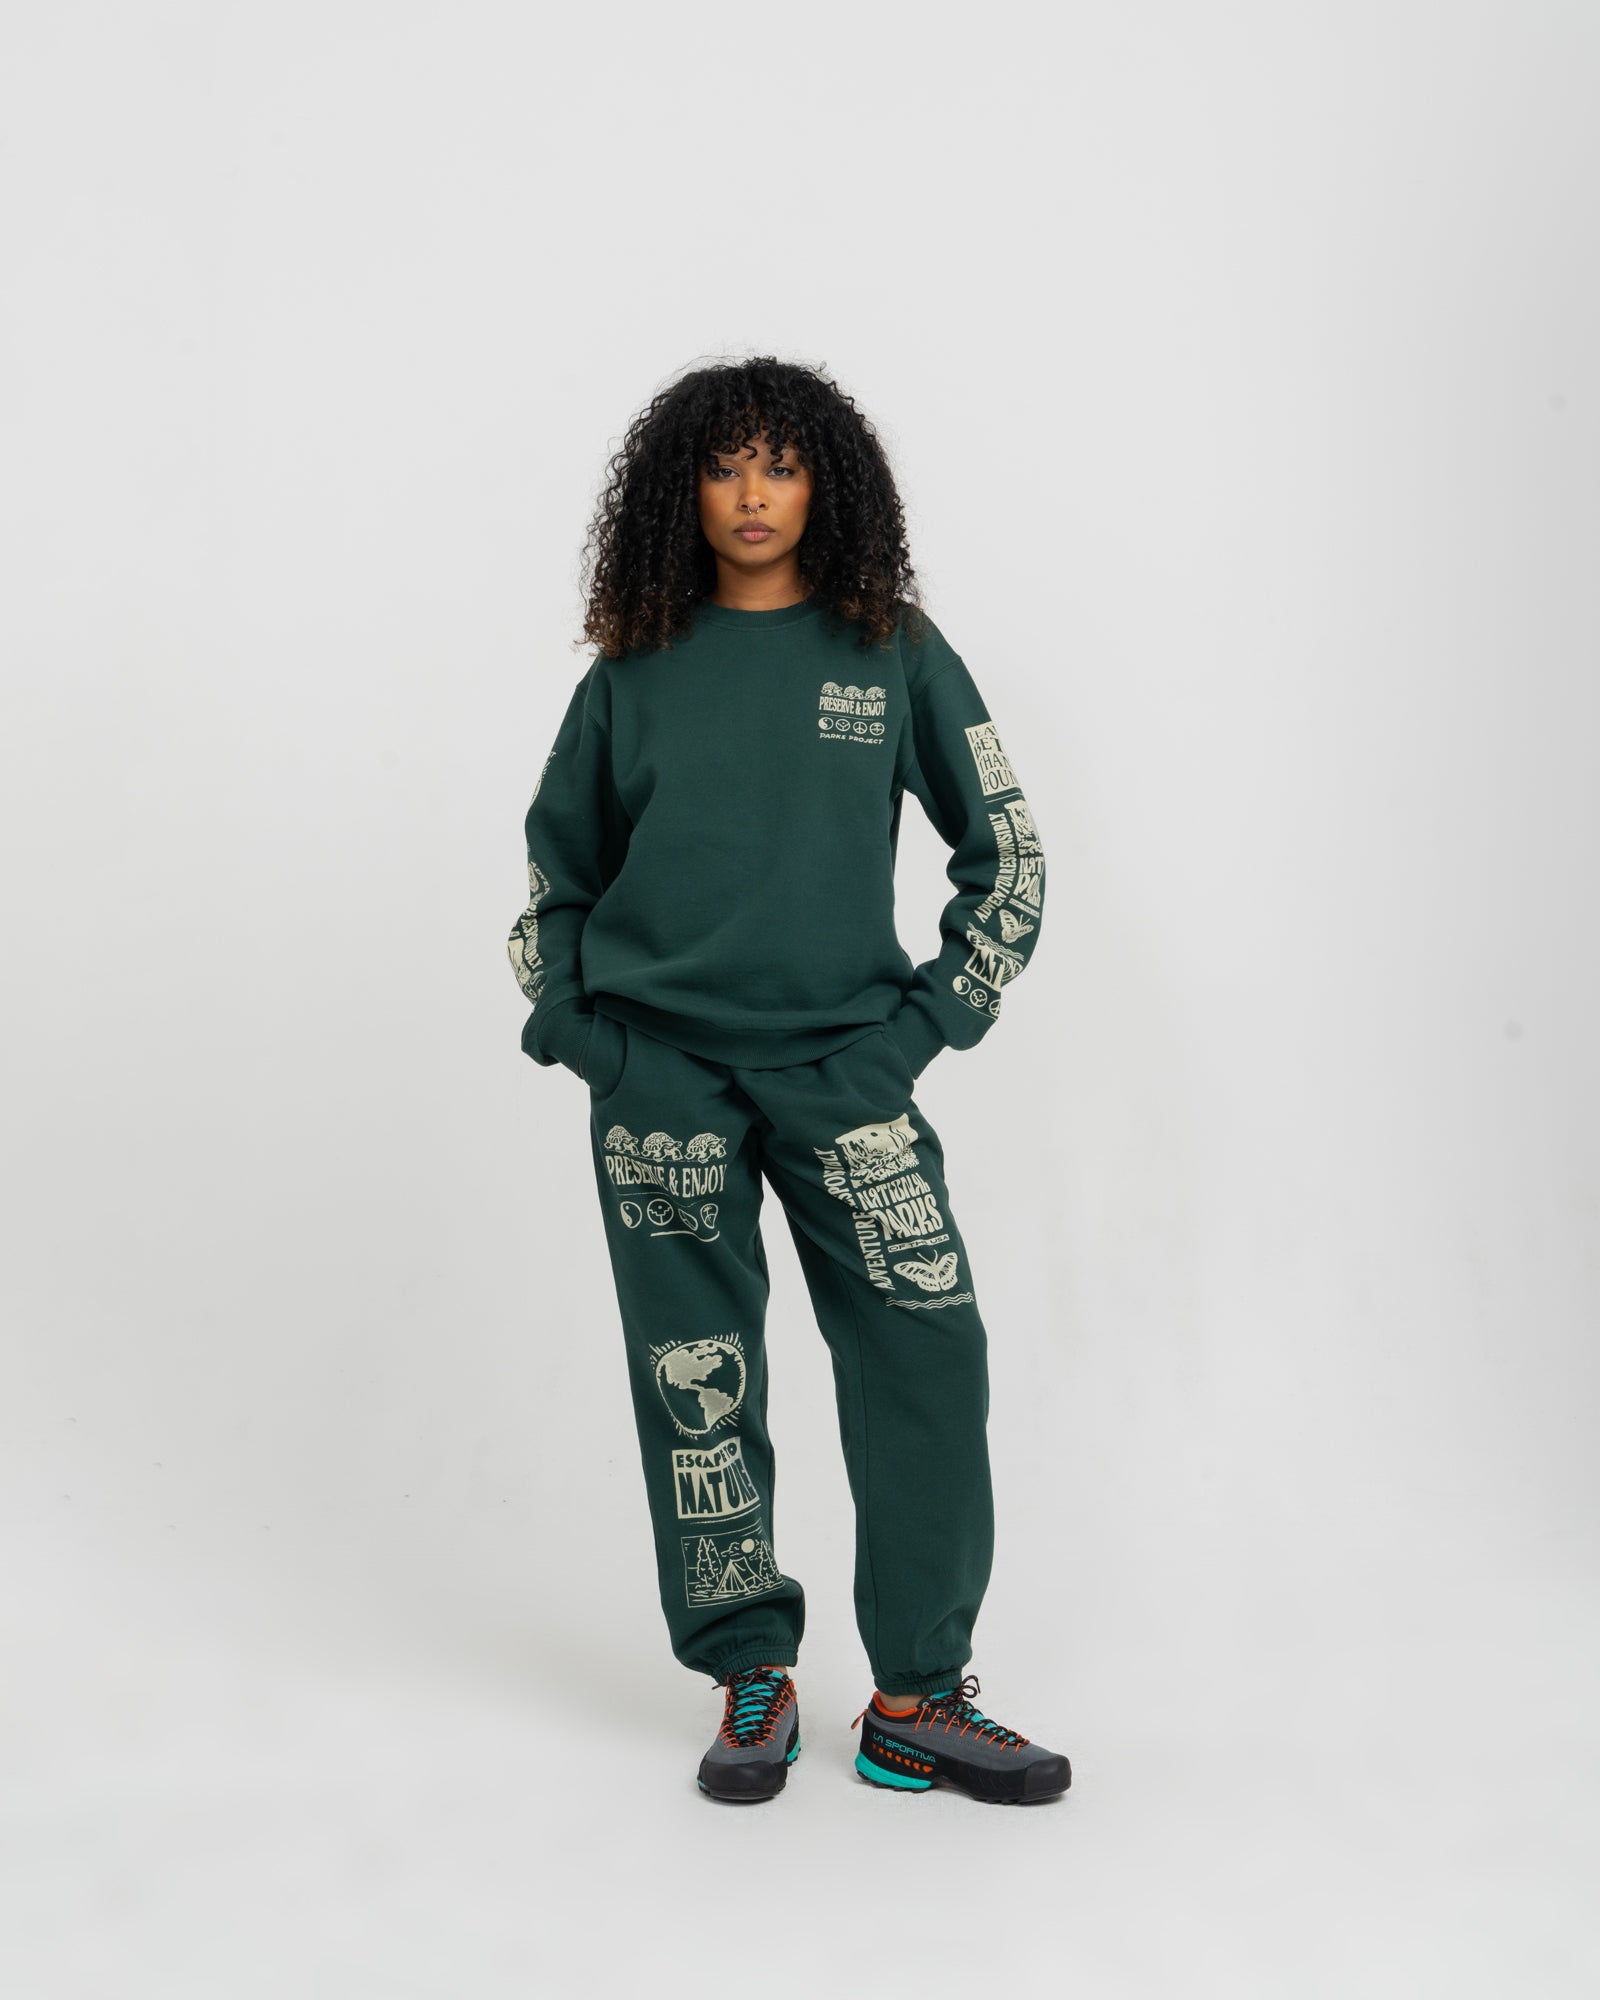 Shop Preserve & Enjoy Jogger Inspired by our National Parks – Parks Project